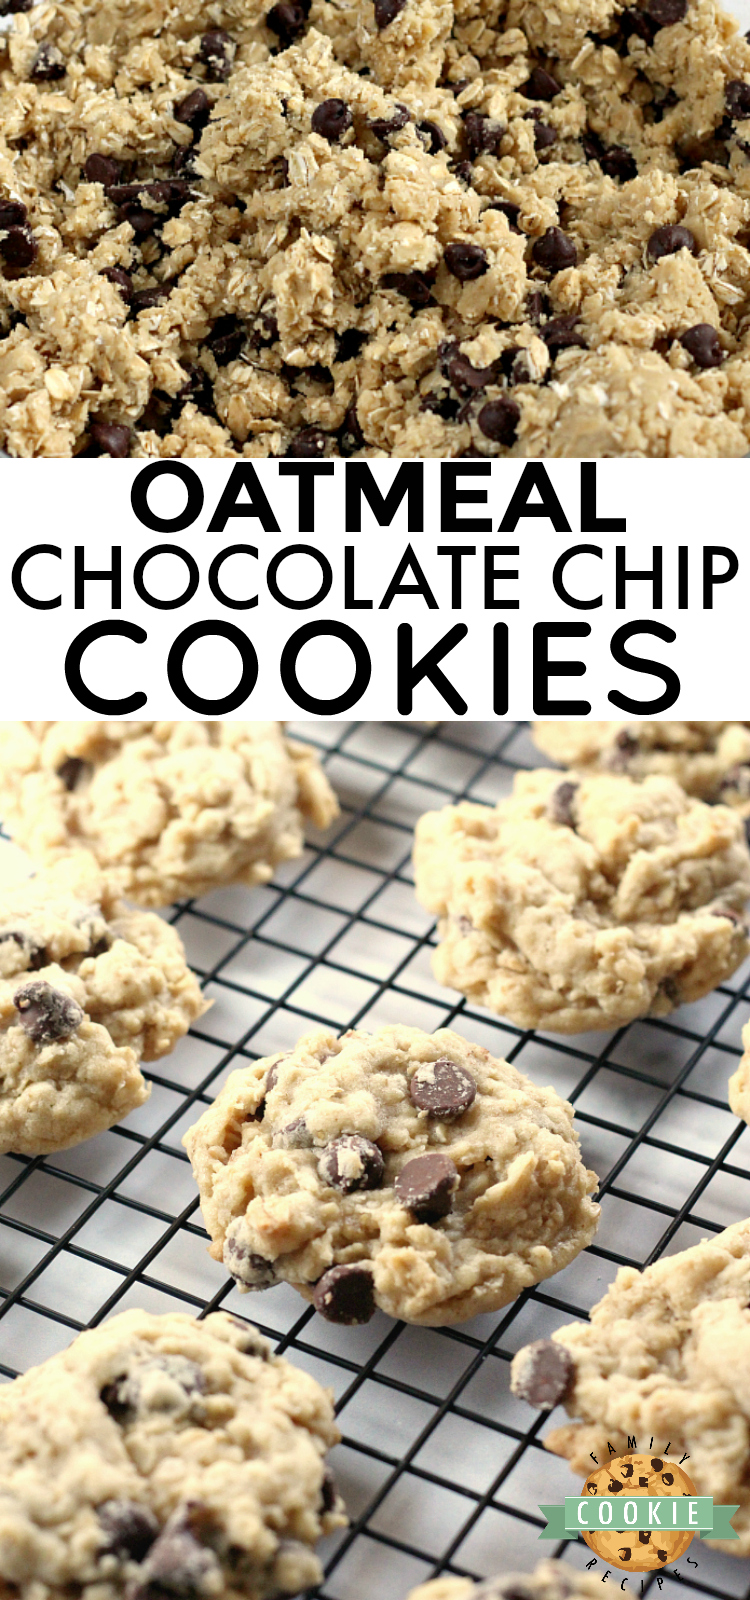 Oatmeal Chocolate Chip Cookies are chewy, delicious and loaded with oats and chocolate chips. This classic cookie recipe has been a family favorite for many years - it's the best Oatmeal Chocolate Chip Cookie recipe ever!